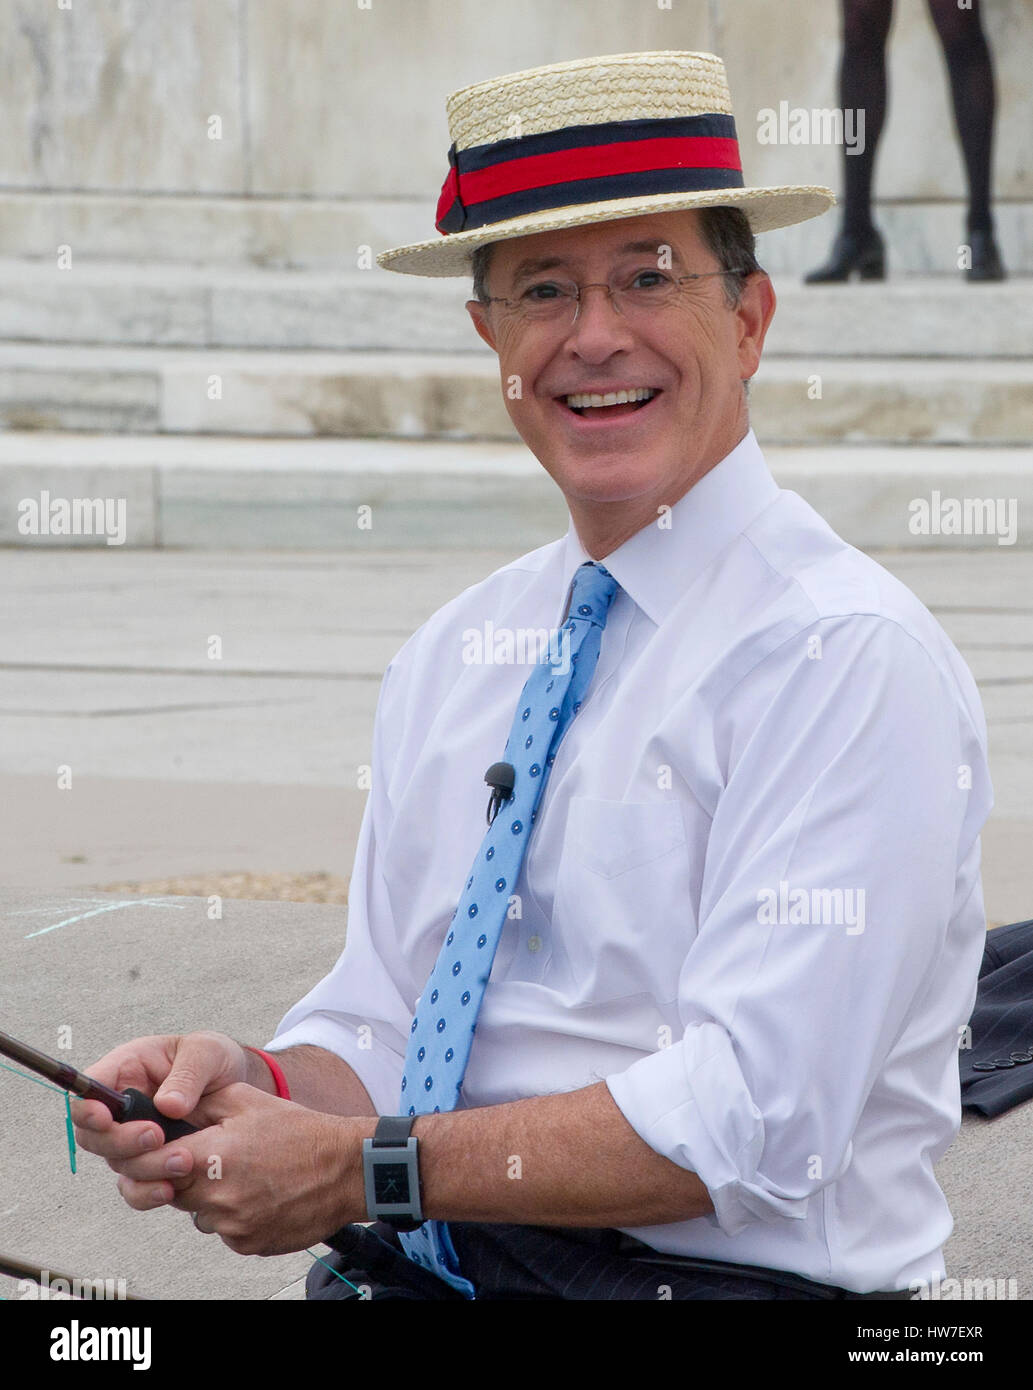 Stephen Colbert host of the Comedy Central show 'The Colbert Report' works on bit around the the U.S. Capitol Reflecting Pool in Washington D.C. on Friday October 3 2014. Credit: Ron Sachs / CNP (RESTRICTION: NO New York or New Jersey Newspapers or newspa Stock Photo